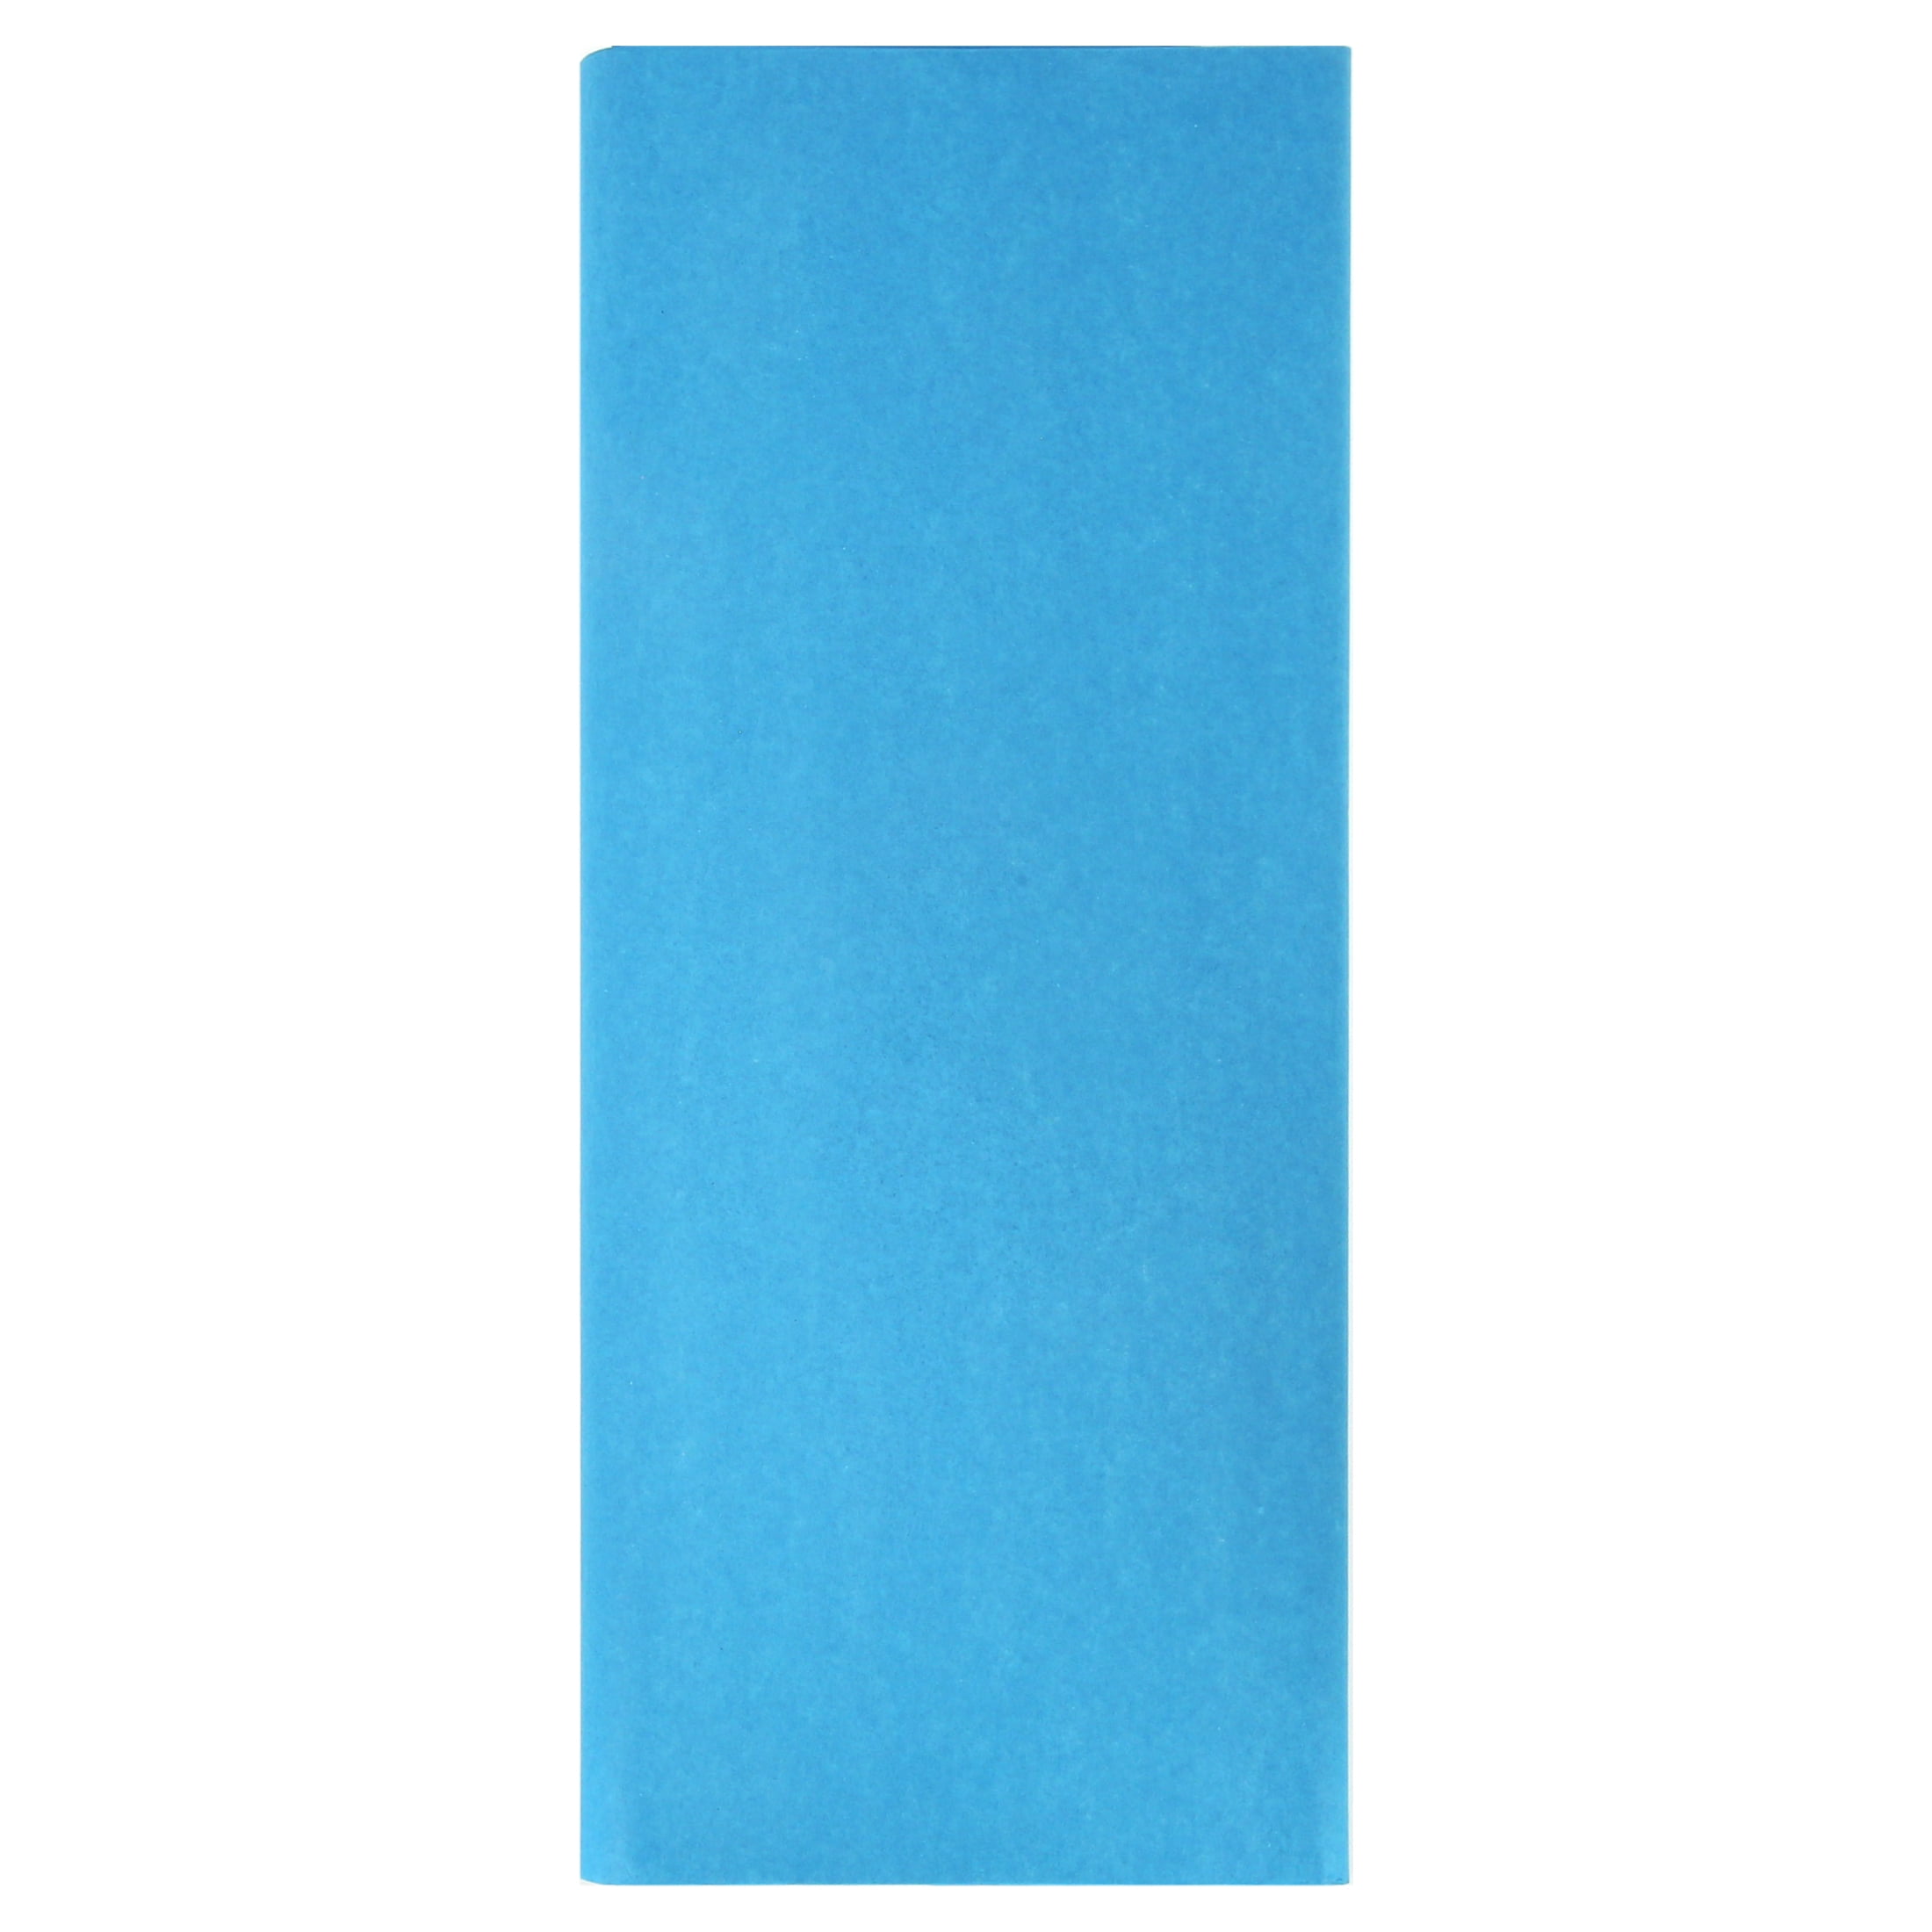 Tissue Paper Sheets - 15 x 20, Turquoise S-13177TRQ - Uline